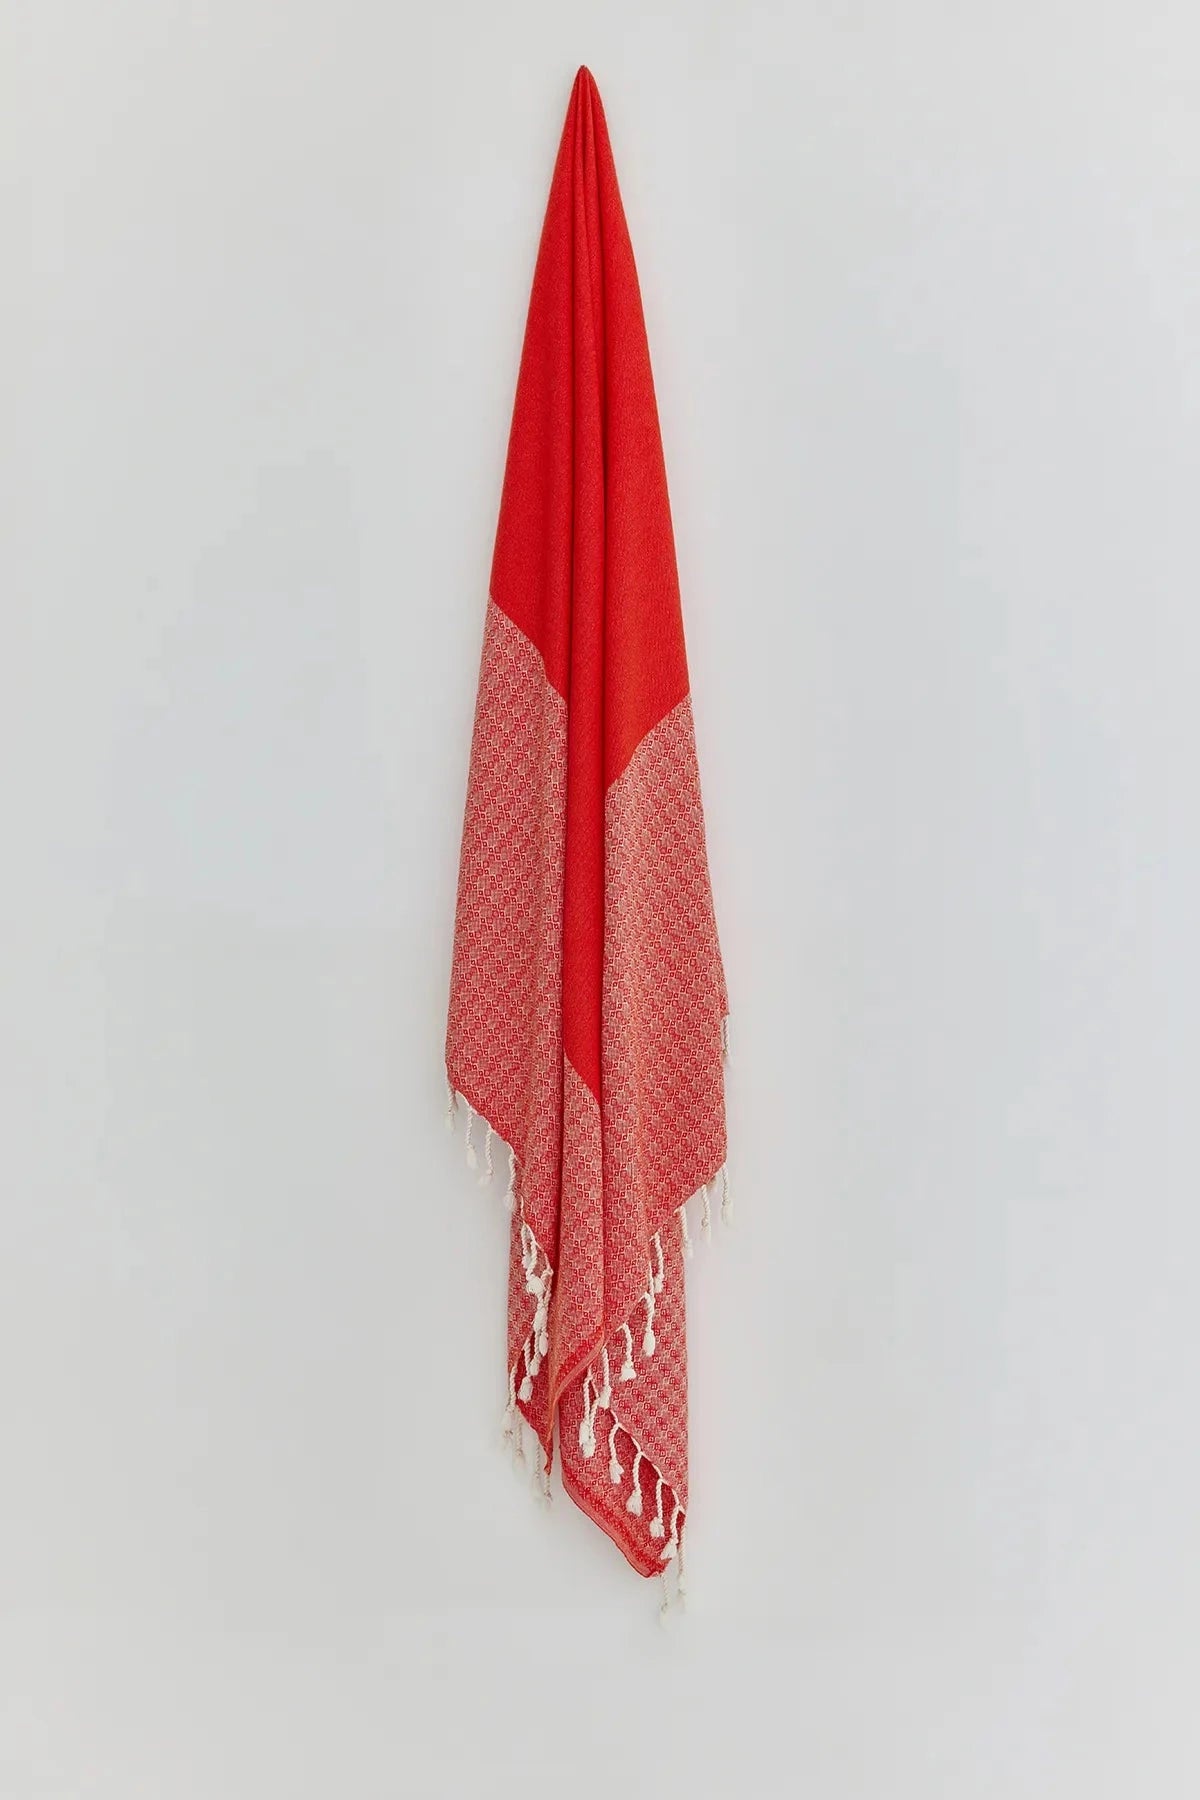 Beach/Bath,living place,Red Charm,Turkish towel,hanged,summer,line patterned,double-faces,purified sand,light,compact, easy pack,fun, recycled,double color,diamond,eastern flare